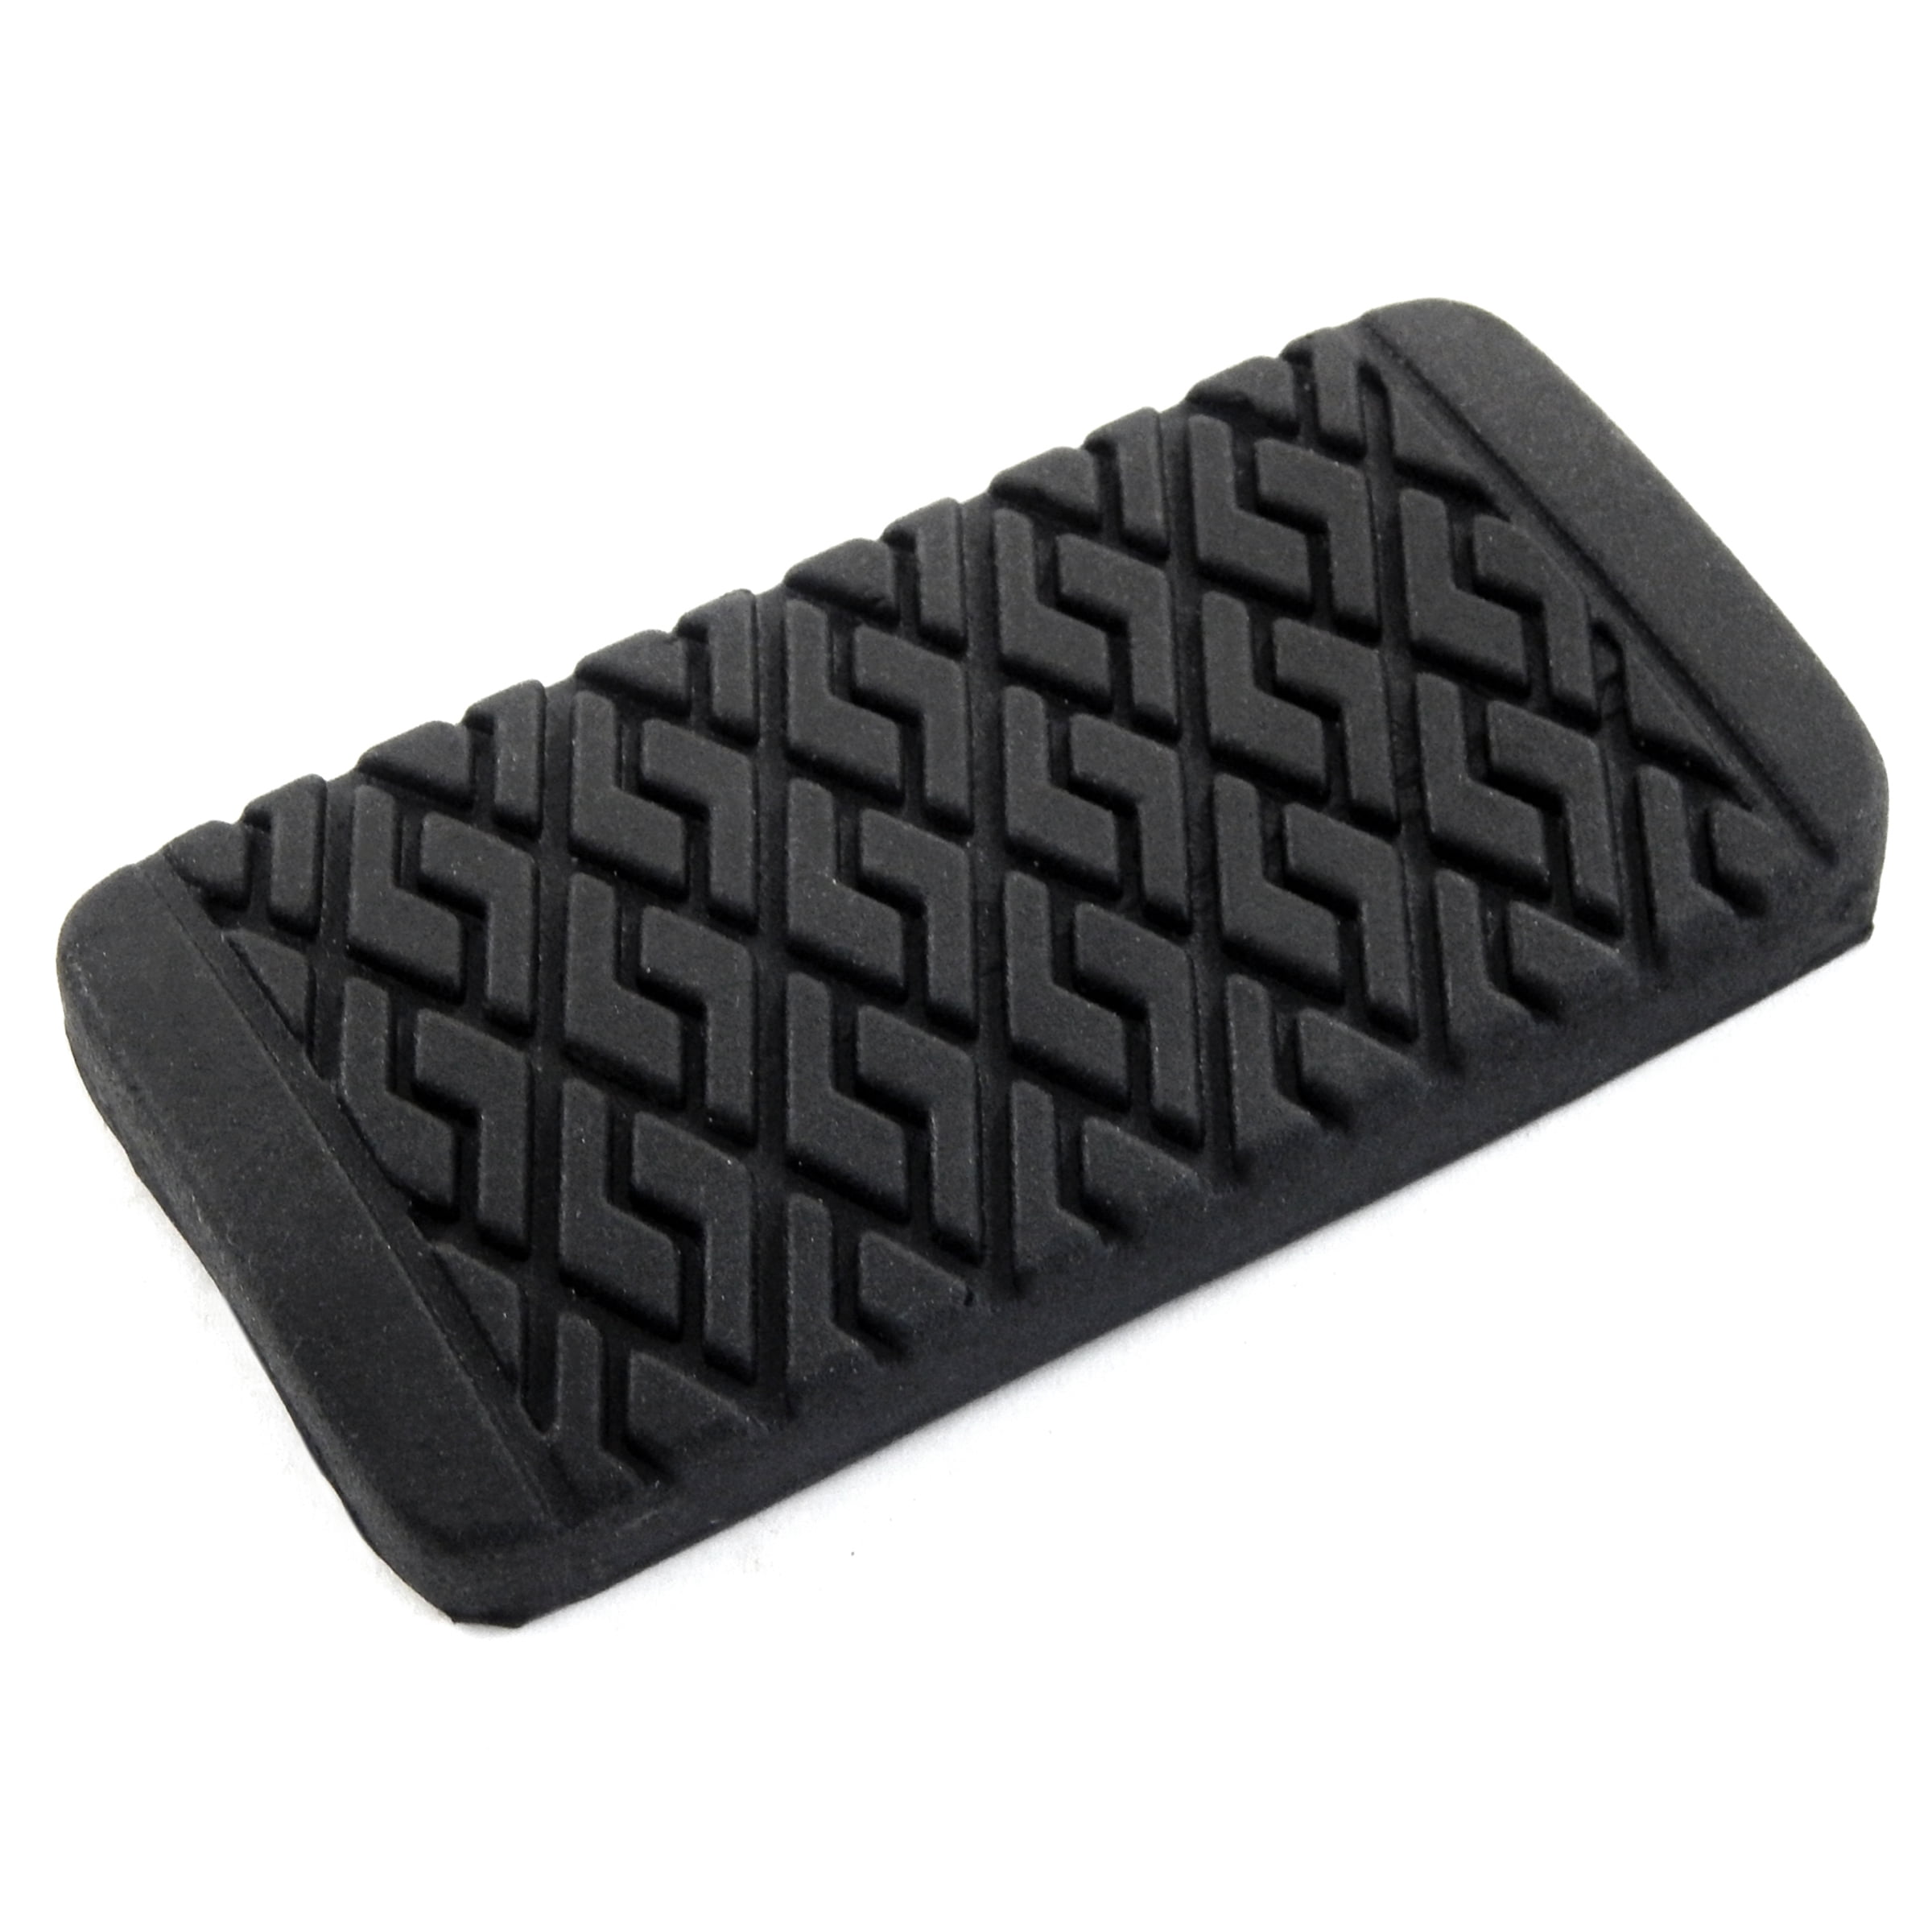 Red Hound Auto Automatic Transmission Brake Pedal Pad Compatible with GMC Jimmy Yukon 1975-1991 and More 